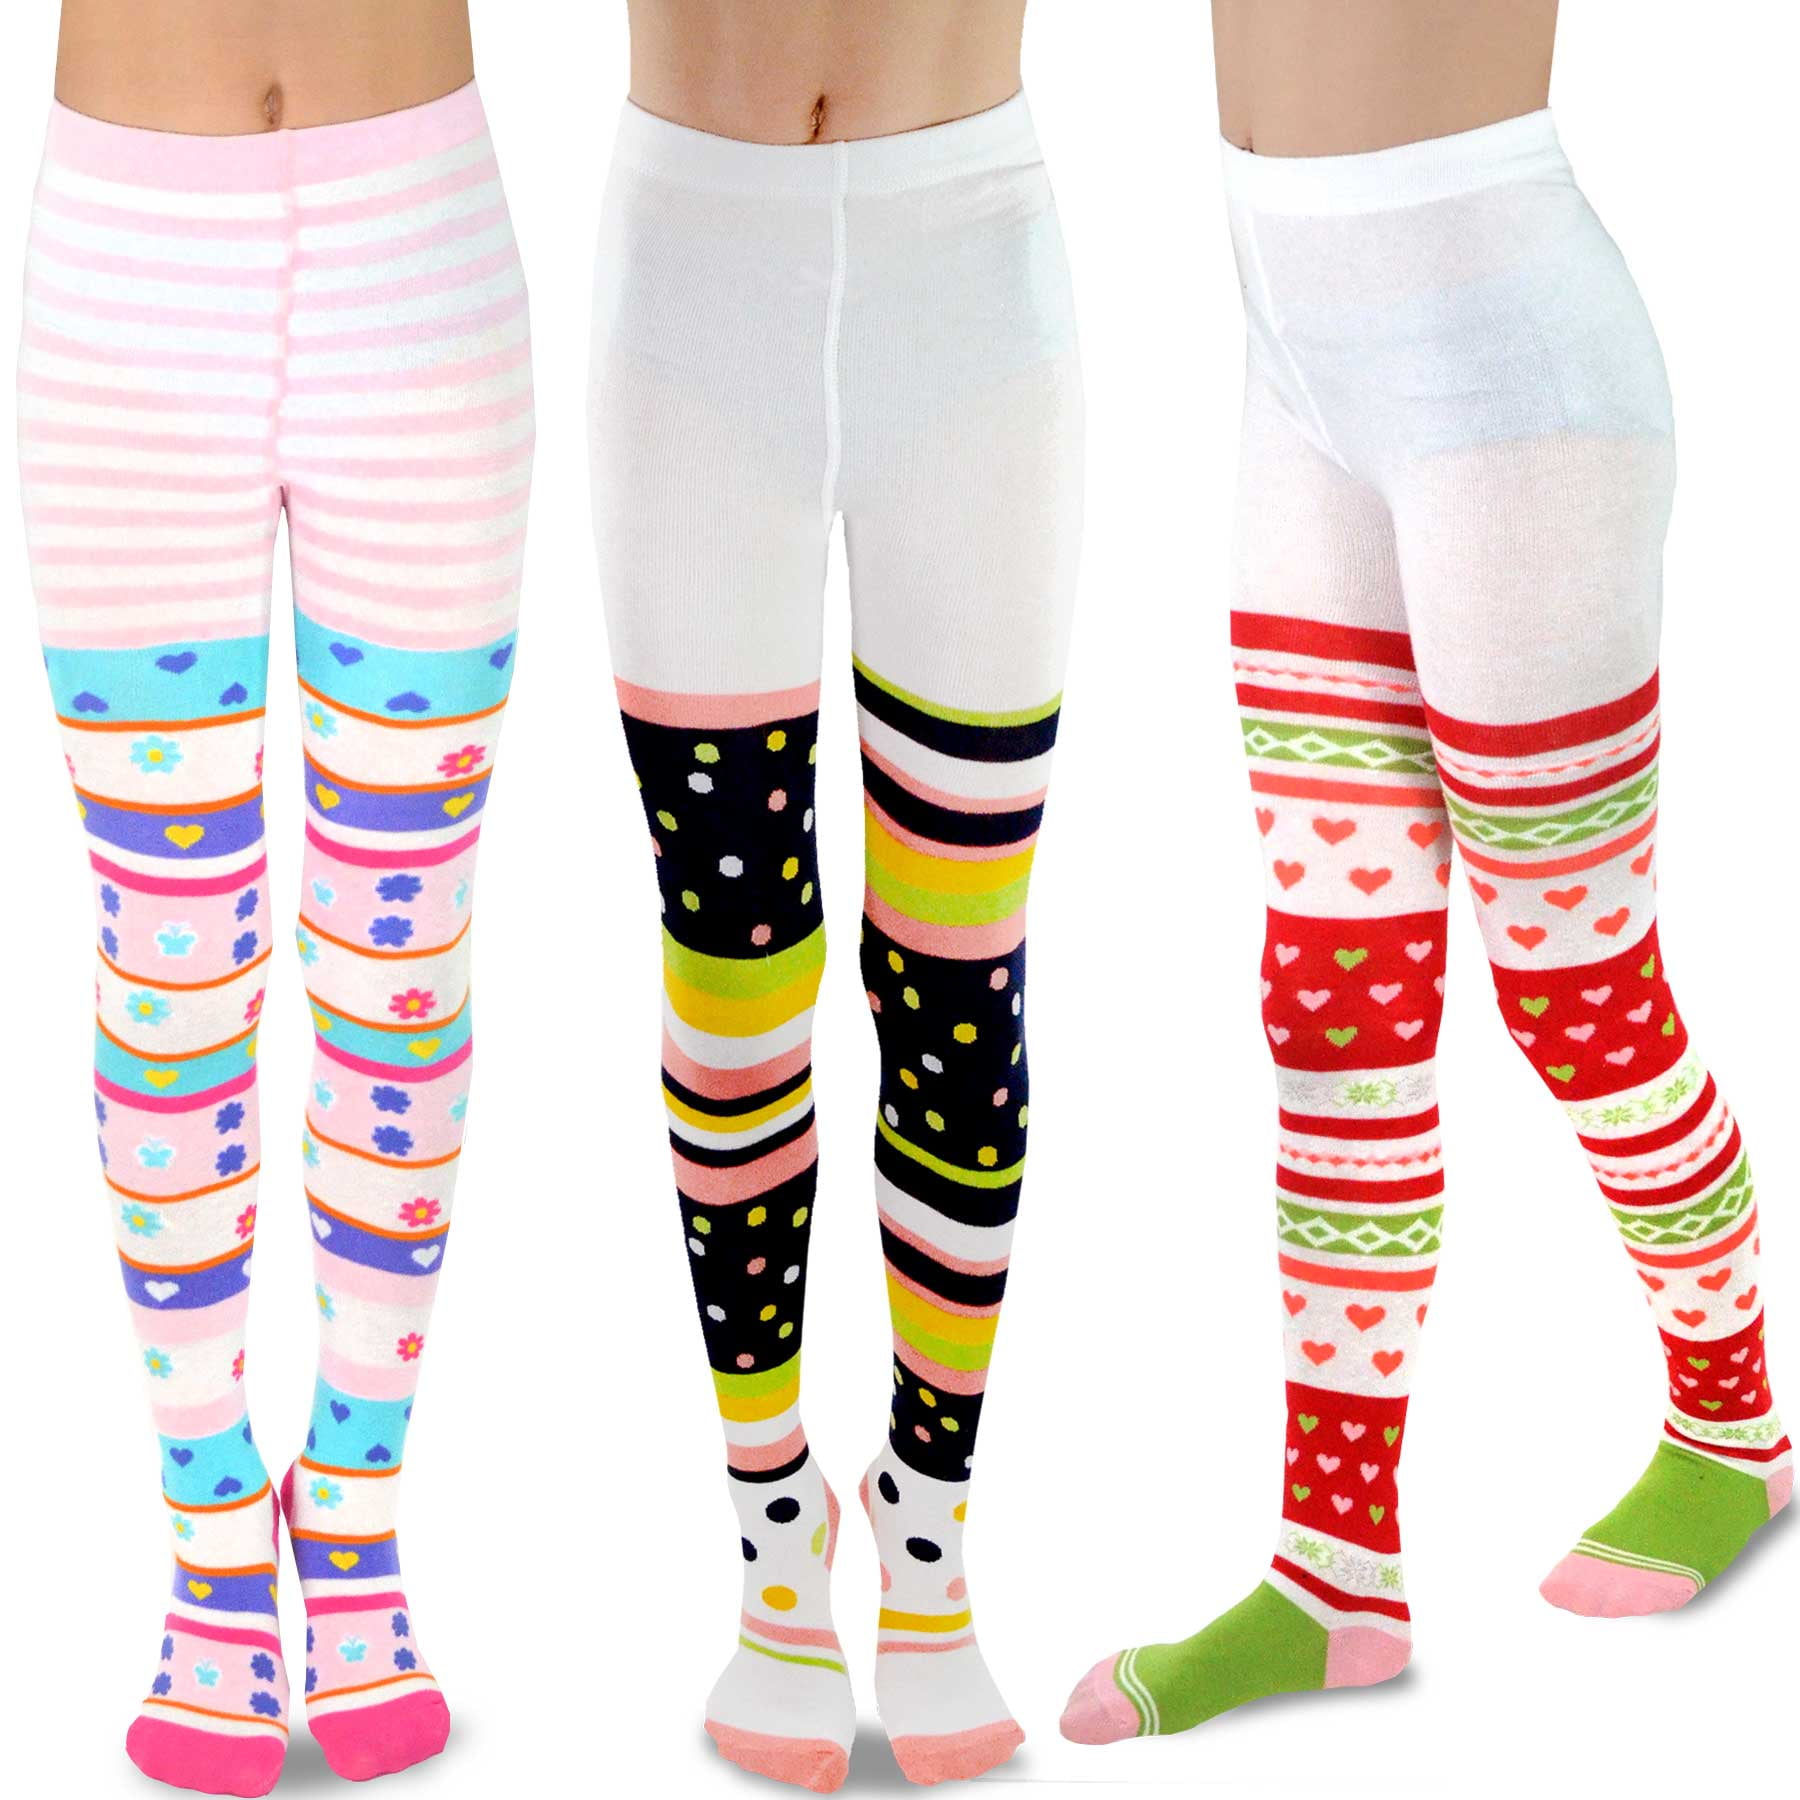 Girls Childrens 3 Pairs Plain Tights Back To School Everyday Cotton Rich Leggings